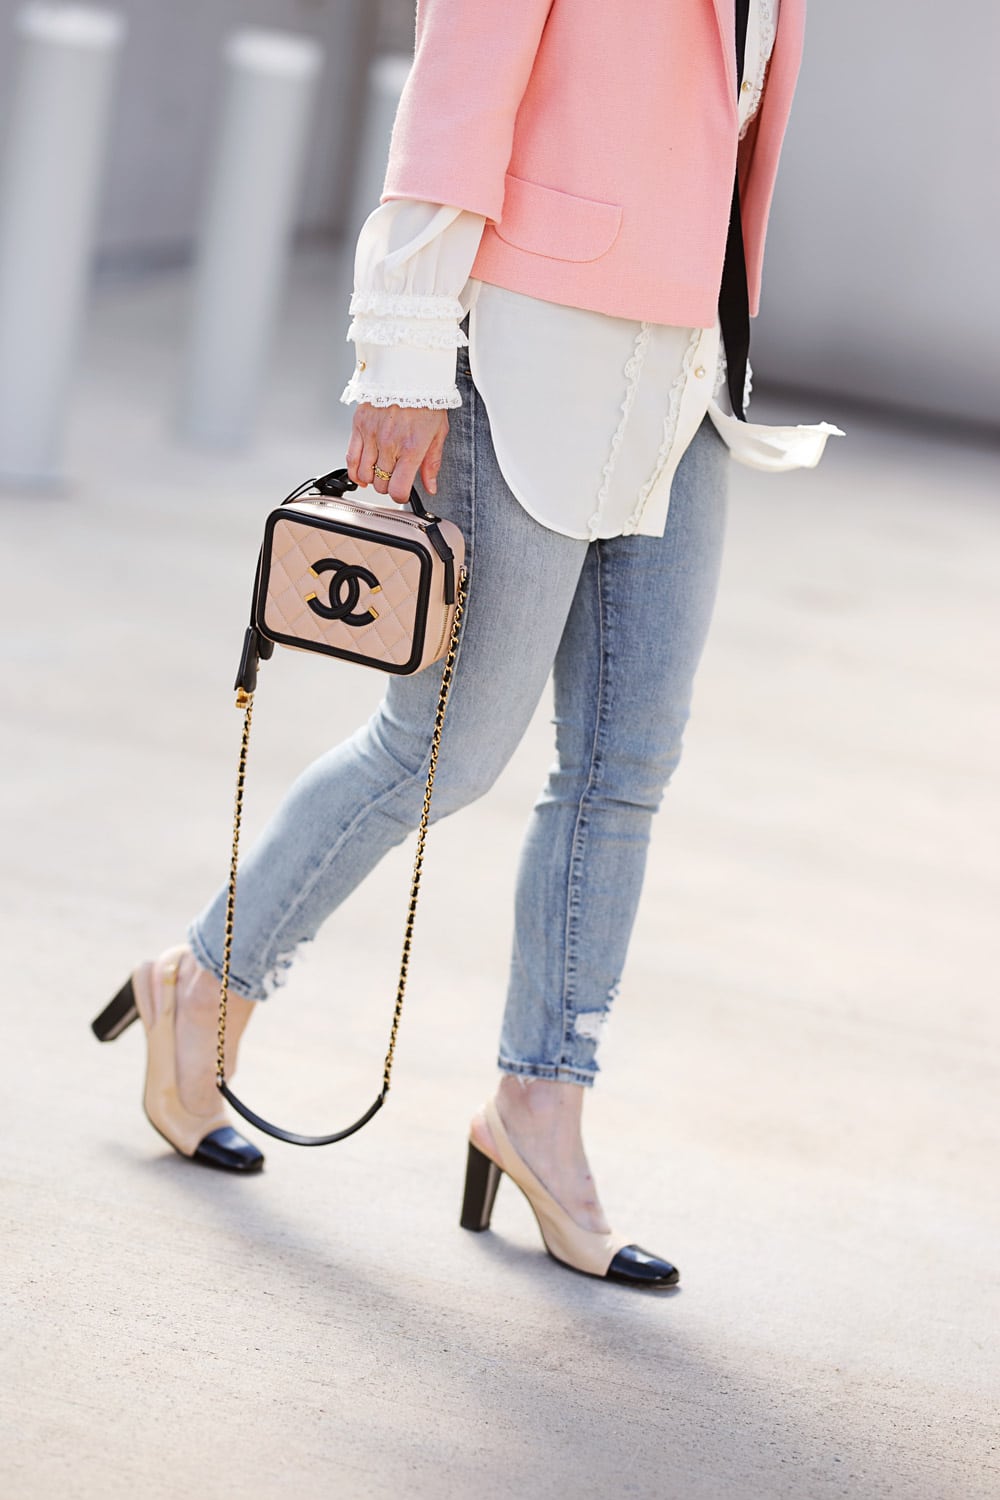 style of sam in cropped pink jacket and chanel vanity bag with cap toe heels